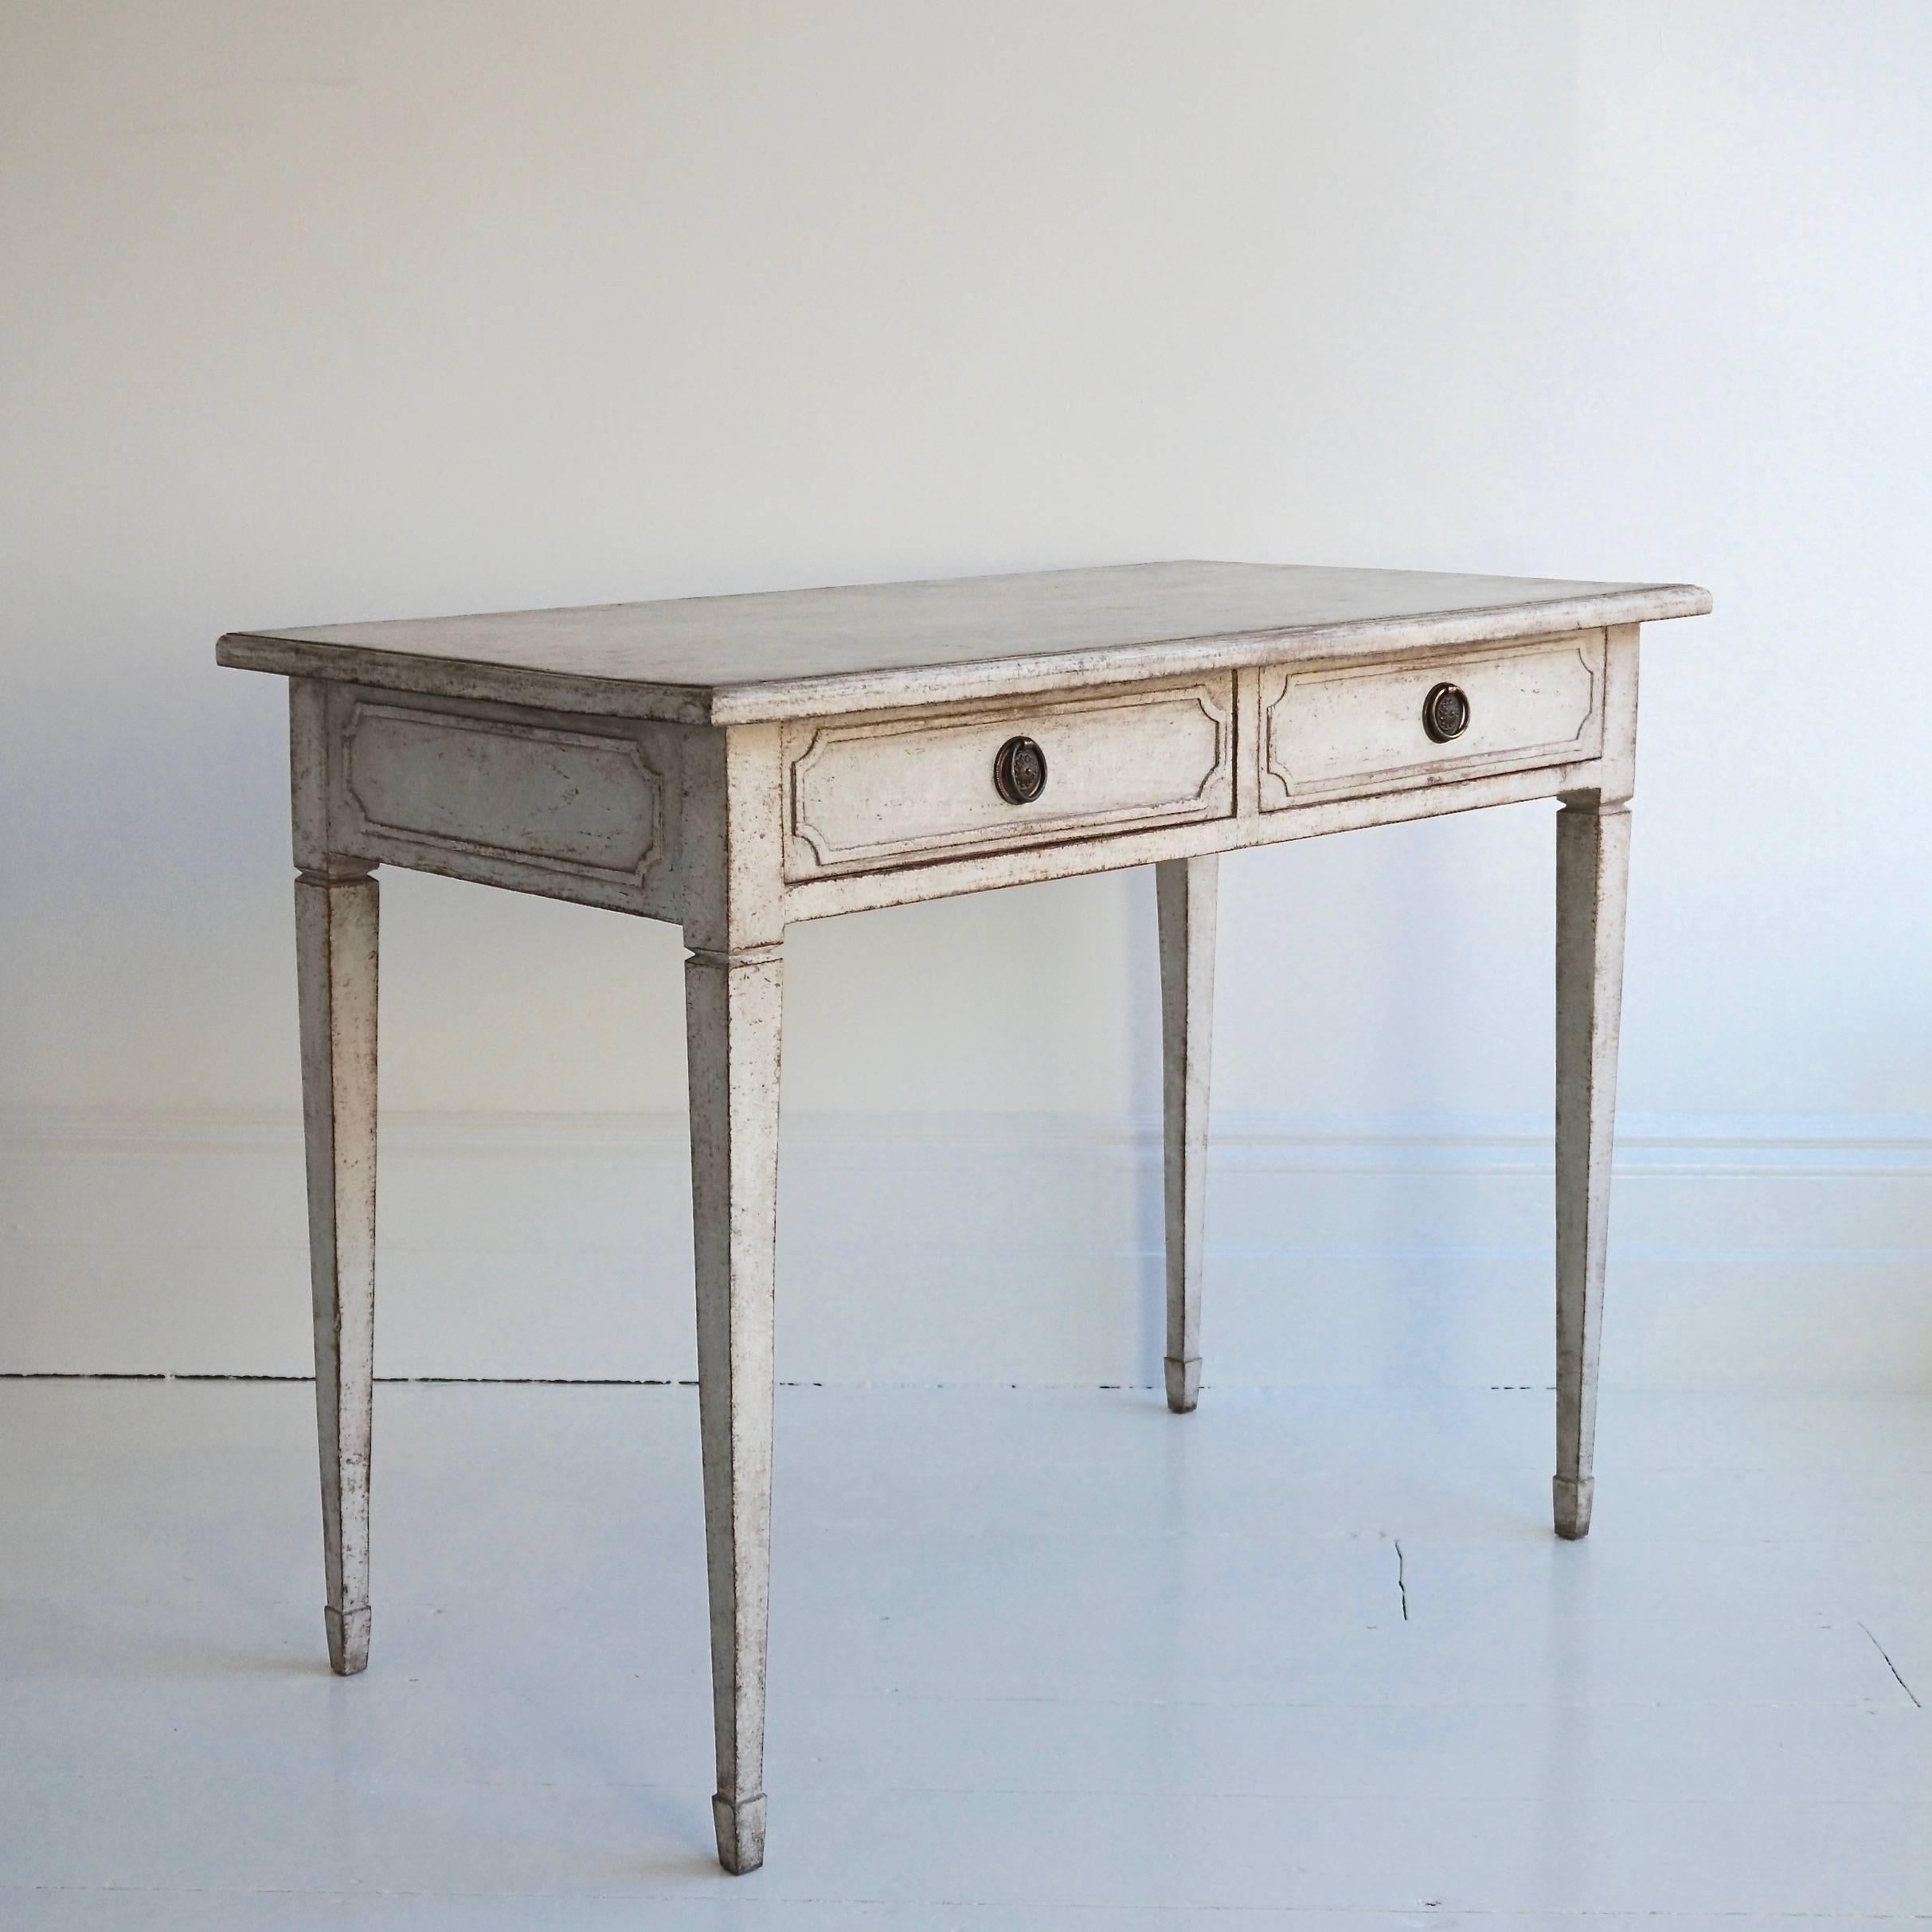 Hand-Carved 19th Century Swedish Gustavian Style Desk or Side Table